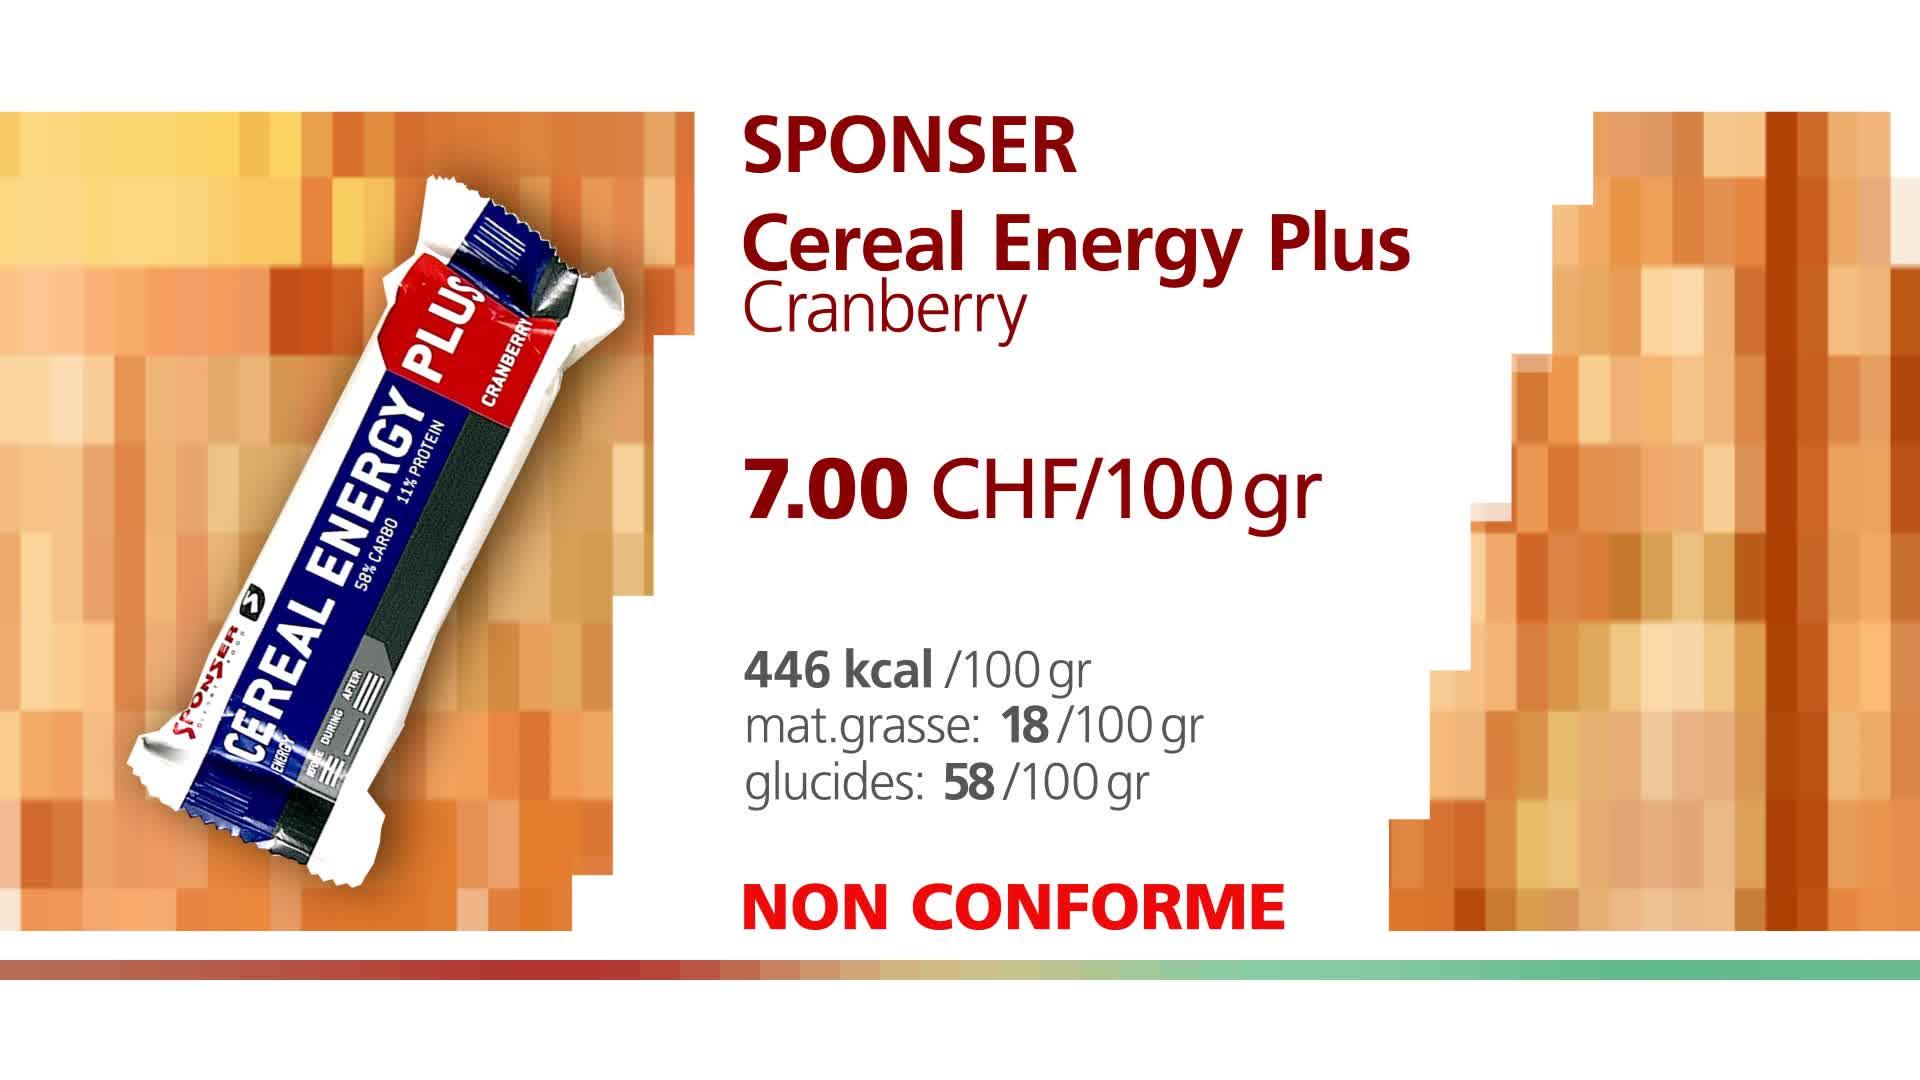 Sponser "Cereal Energy Plus Cranberry".